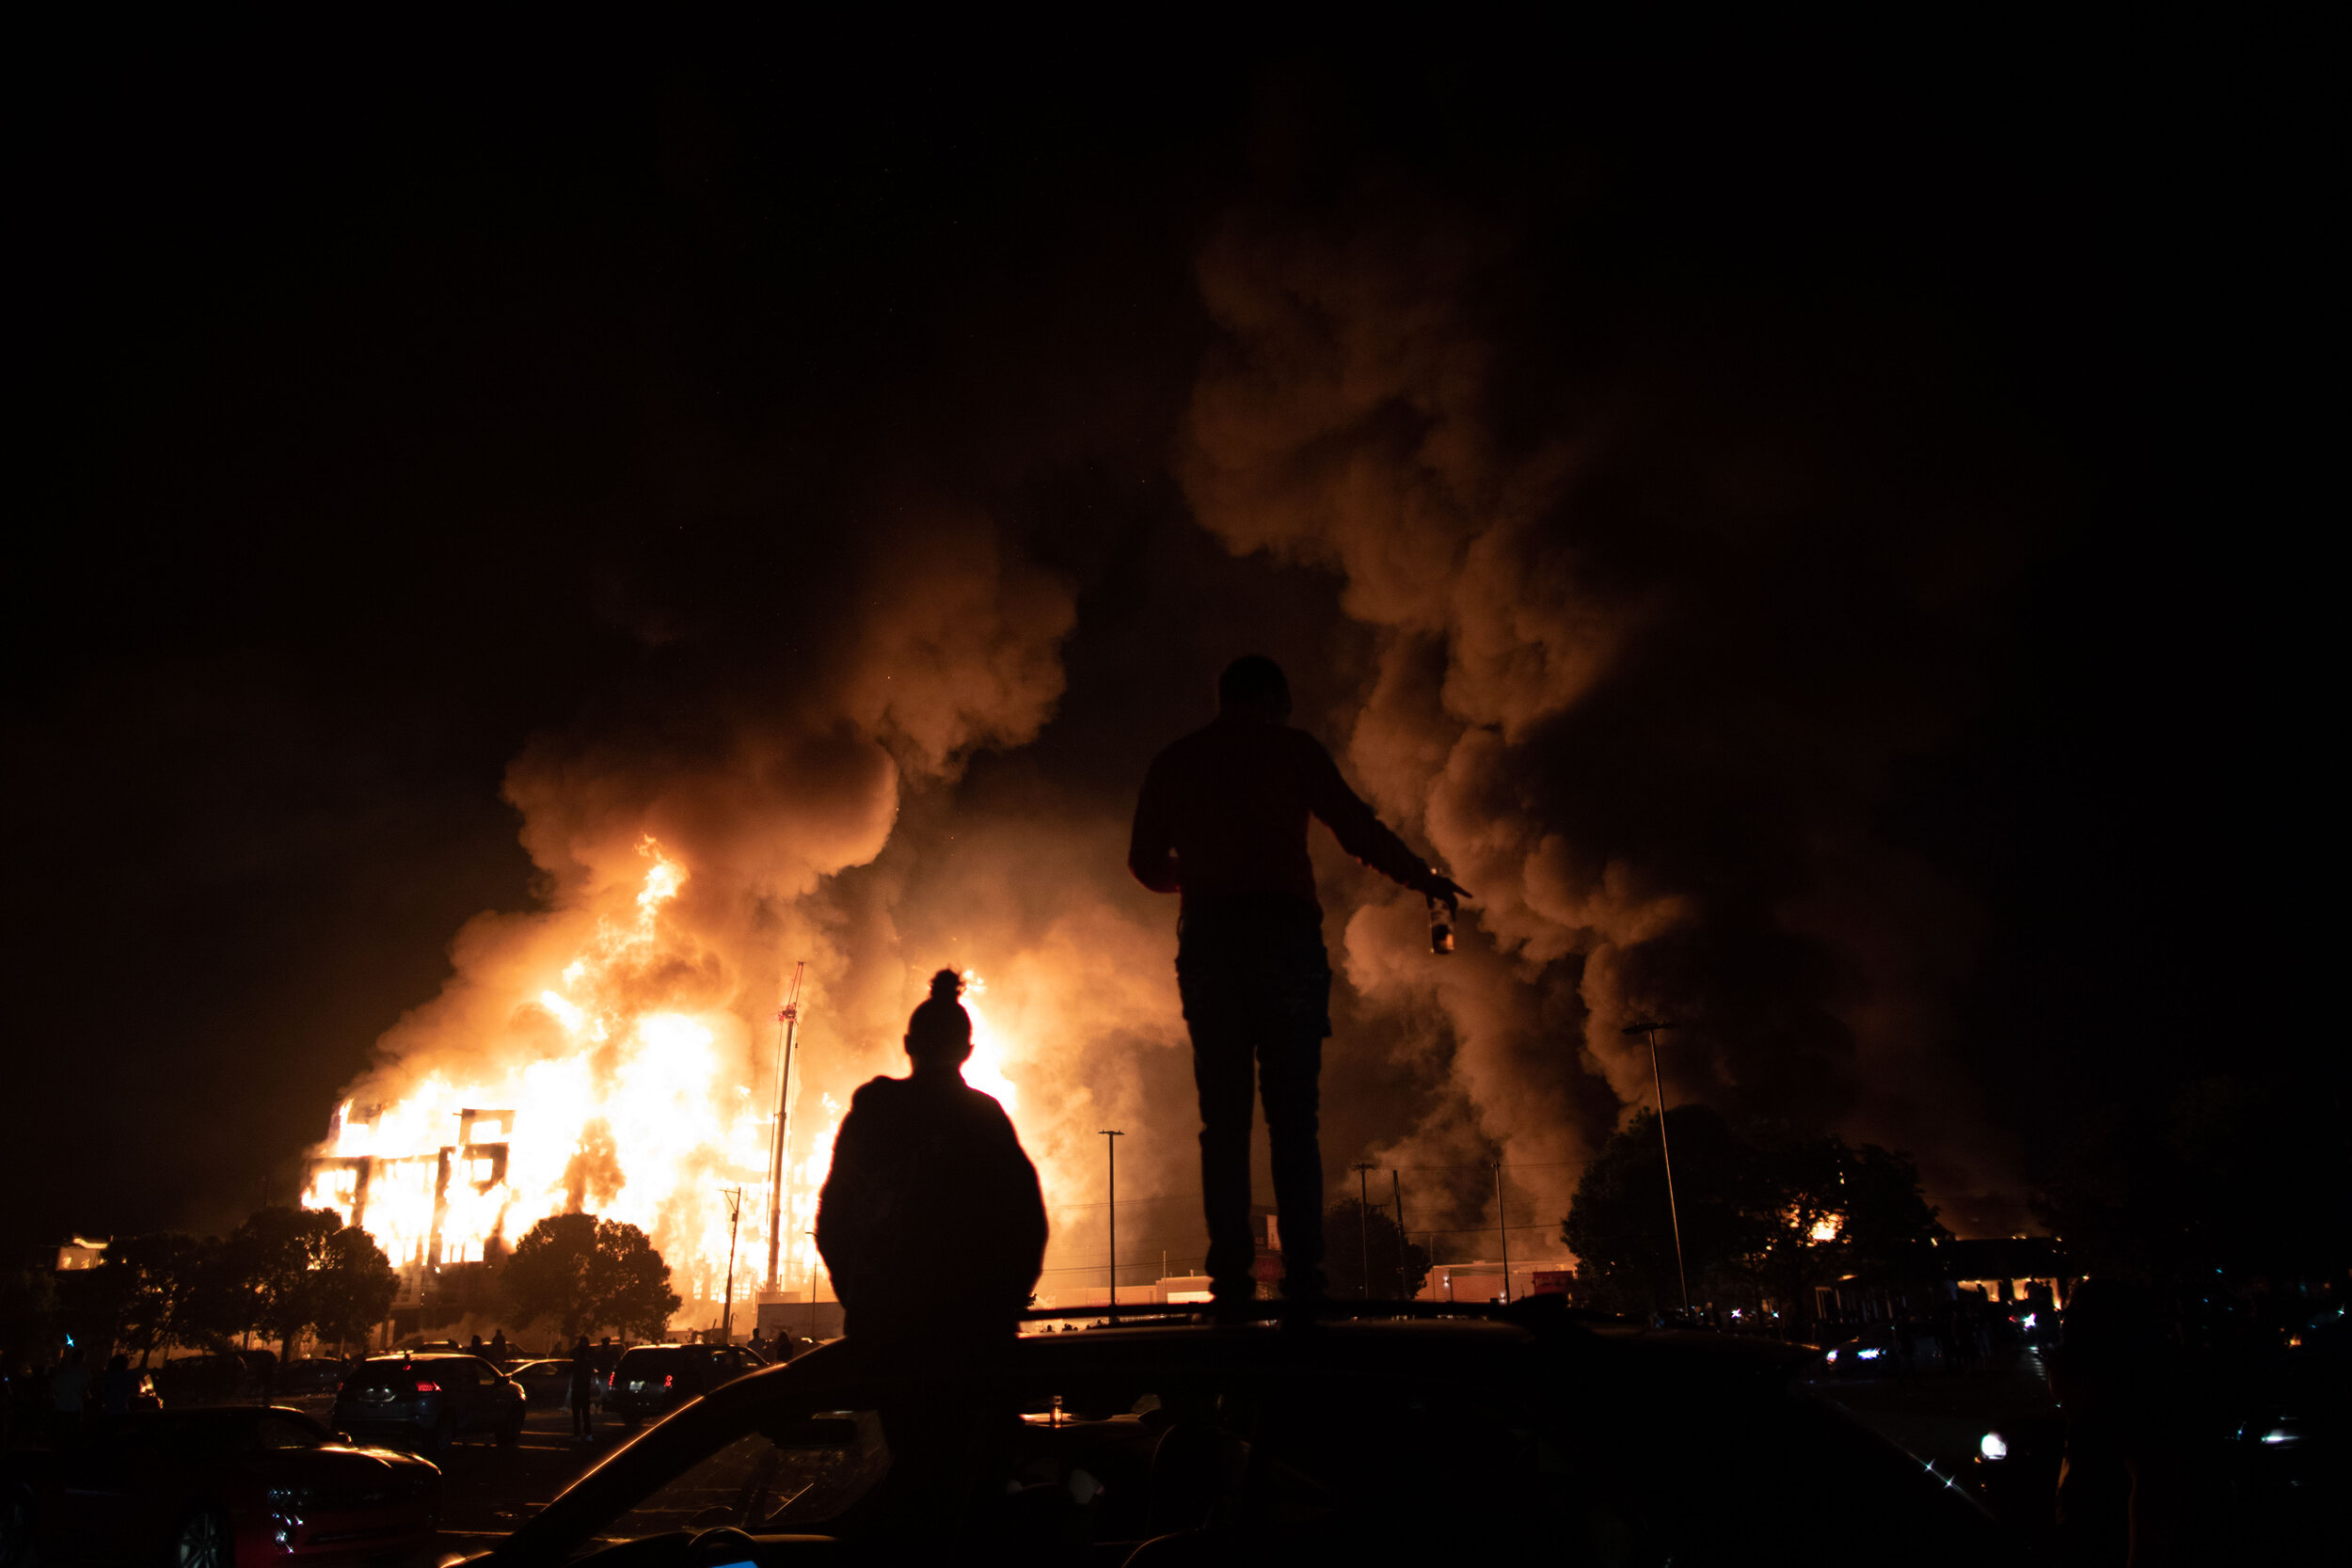  Standing and sitting on top of a car, 2 people watch a190 unit affordable housing complex that was under construction burns after it was set on fire during a riot over the police killing of George Floyd in Minneapolis, Minnesota on May 28. 